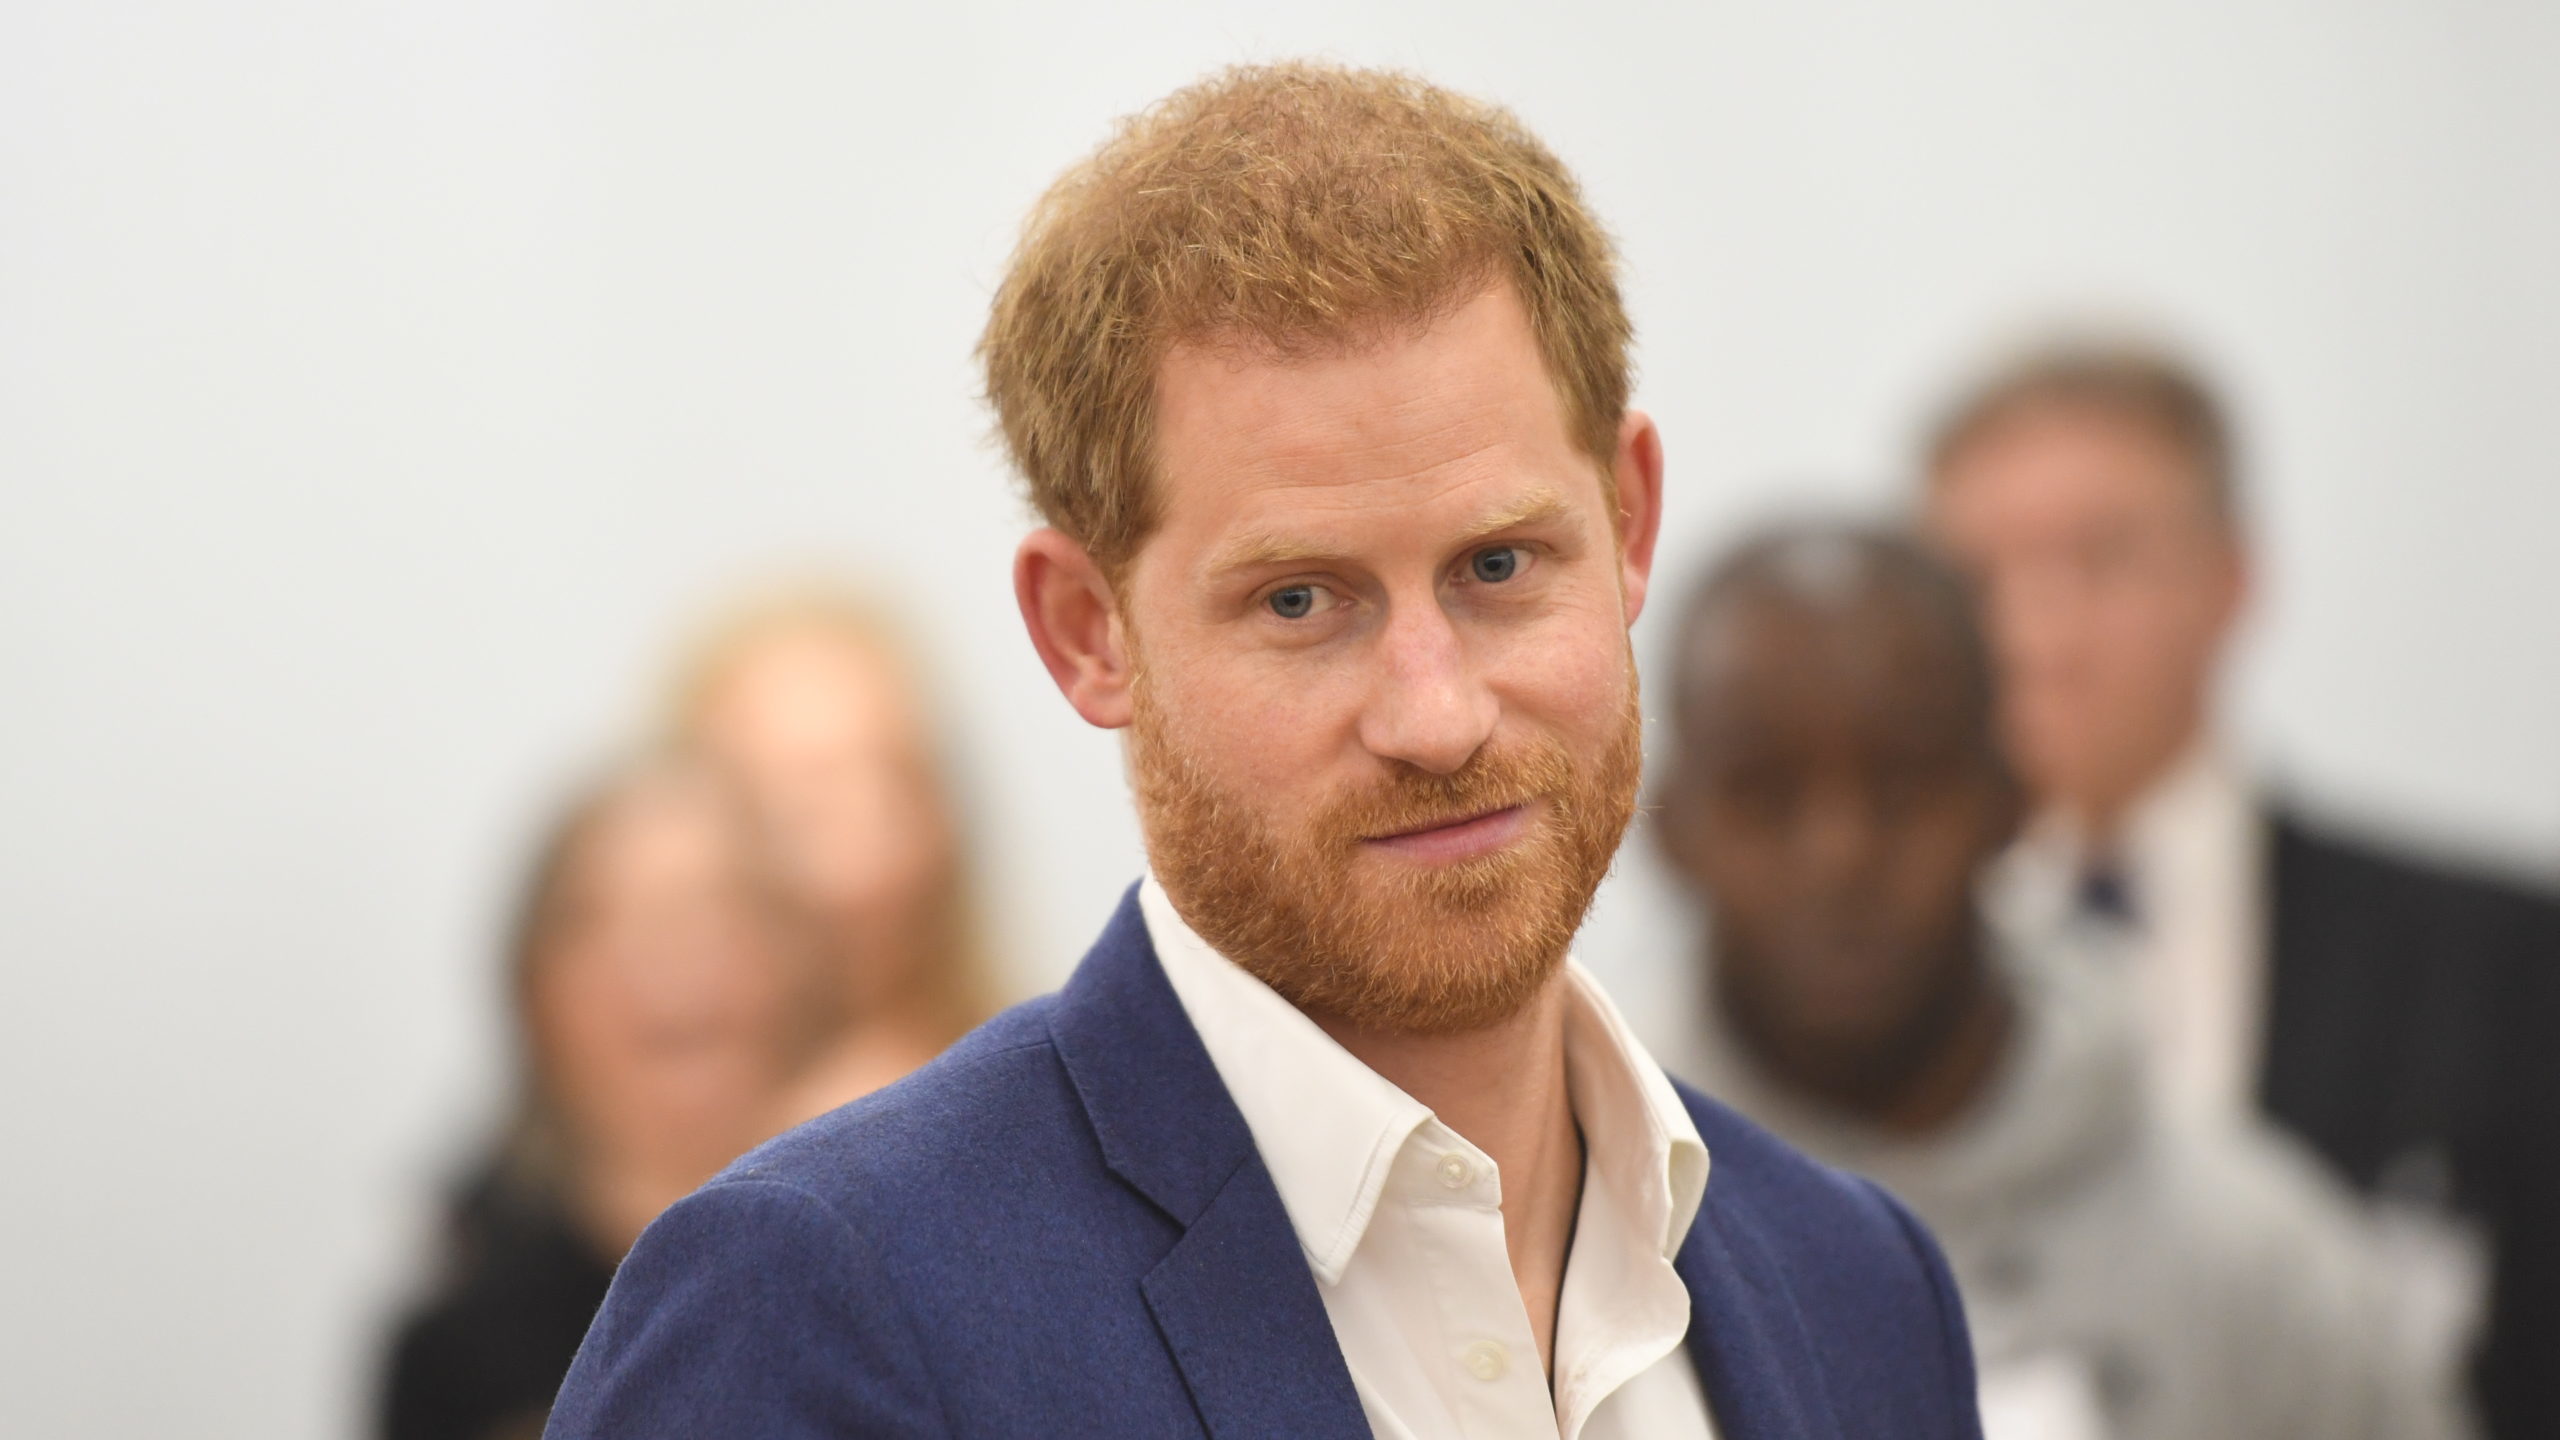 Prince Harry was mistaken for a Christmas tree salesman during his first year in California.